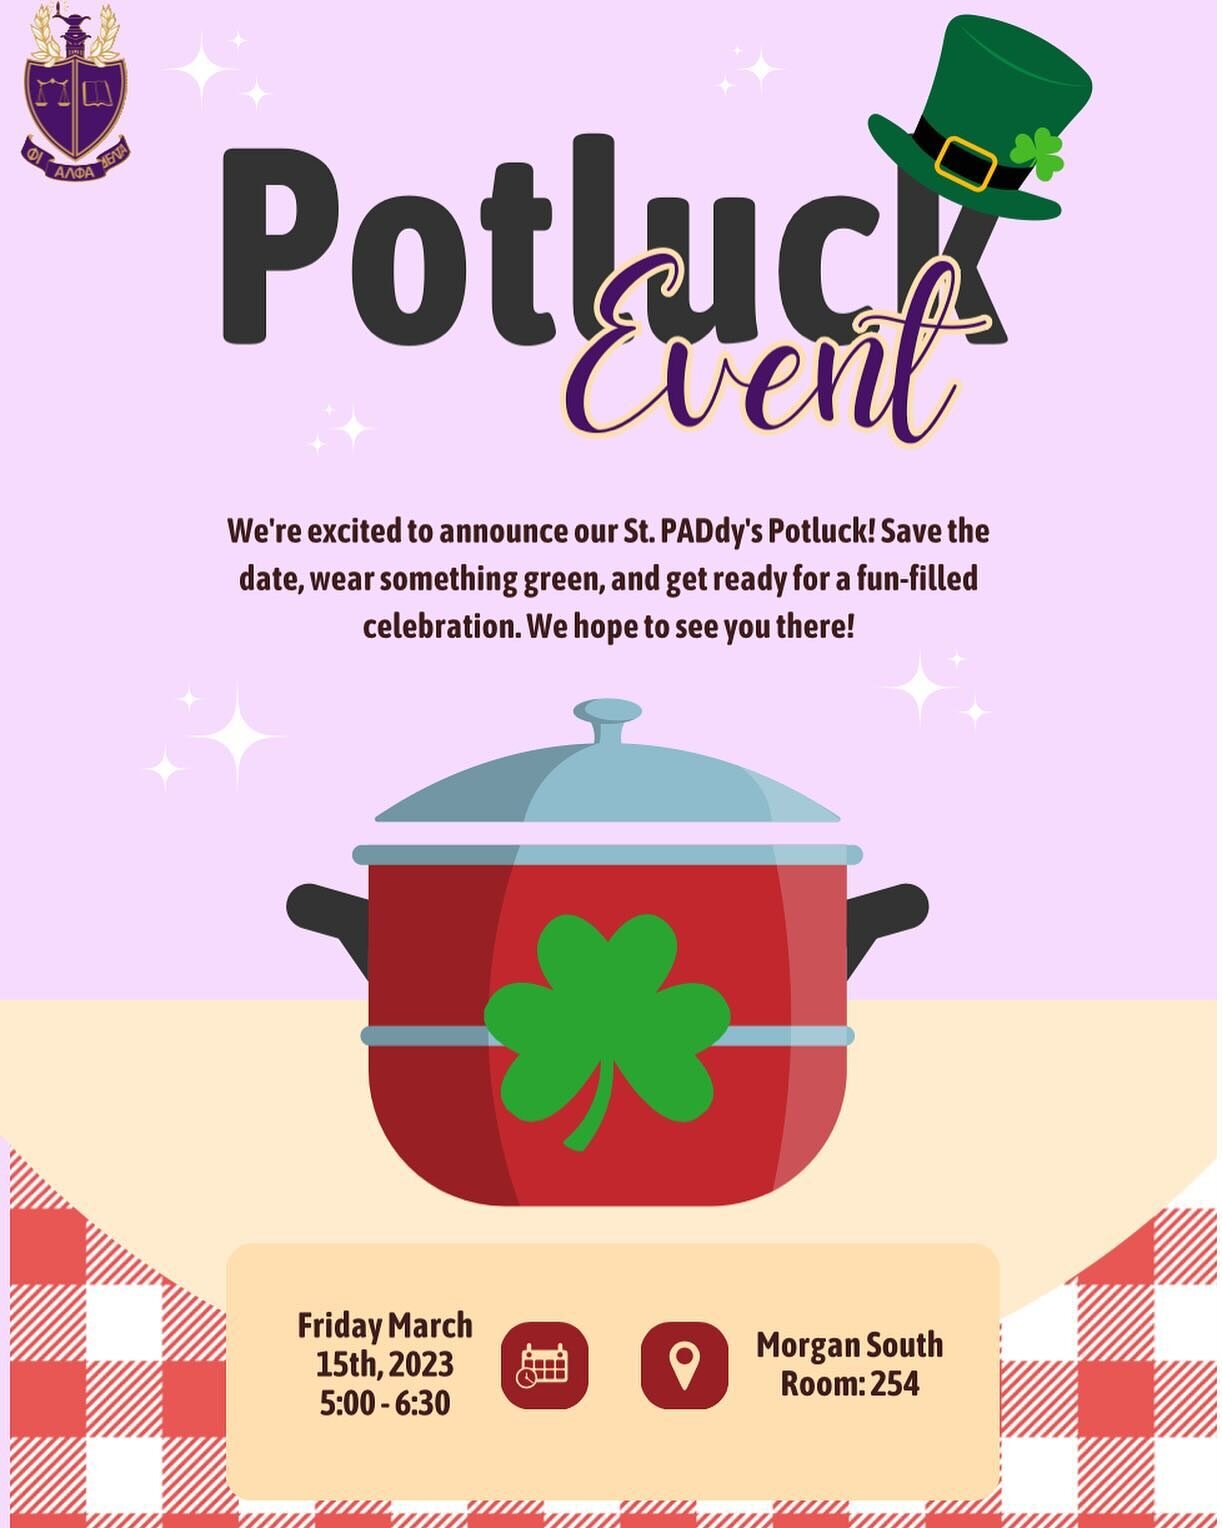 Hello again everyone! We hope you all enjoyed meeting with our wonderful guests at the Law School Fair!! Fortunately the events continue as tonight we will be hosting a potluck, we hope to see you there! #phialphadelta #potluck #law #templeuniversity